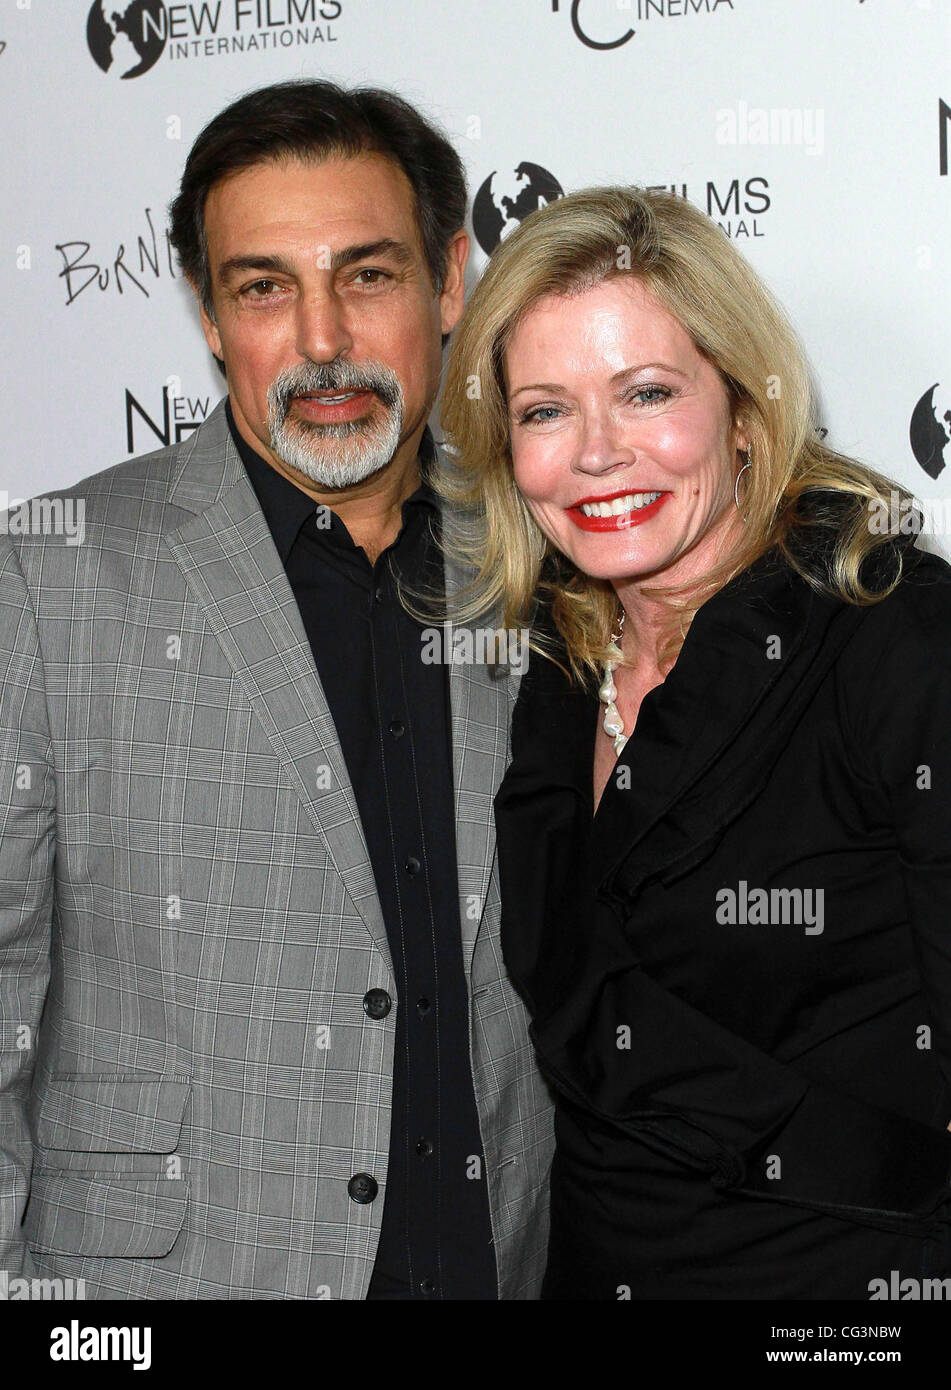 Sheree J. Wilson and Guest the 'Burning Palms' Los Angeles premiere, held at The Arclight Theatre Hollywood, California - 12.01.11 Stock Photo